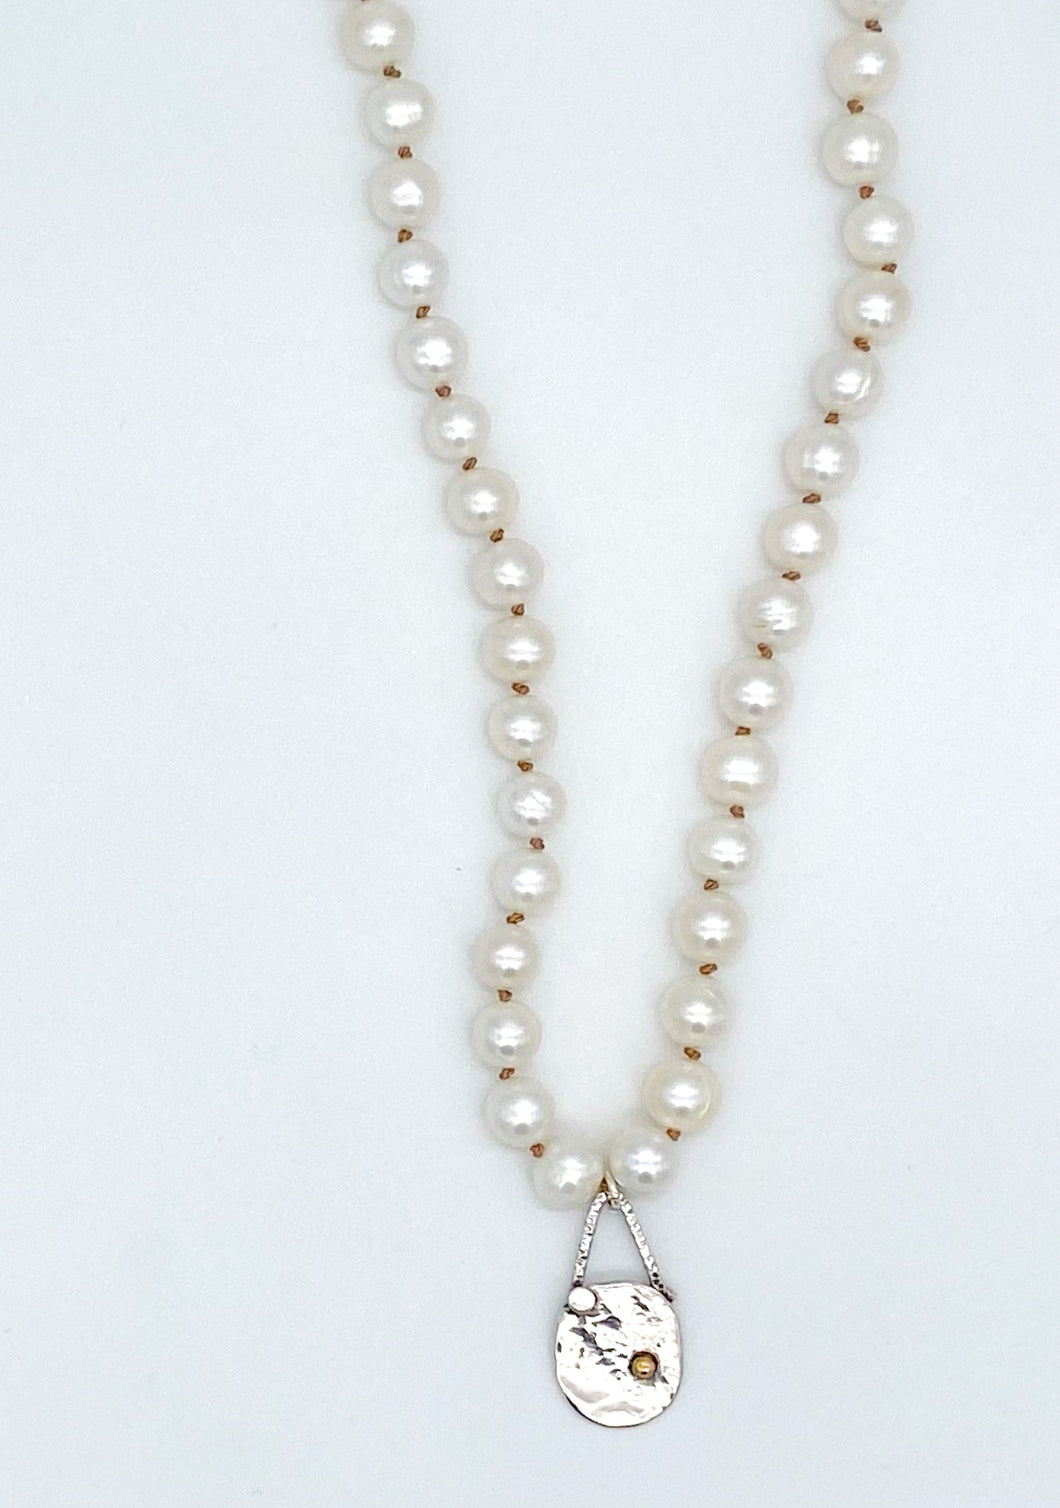 Pearl, silver, and 14 karat gold necklace